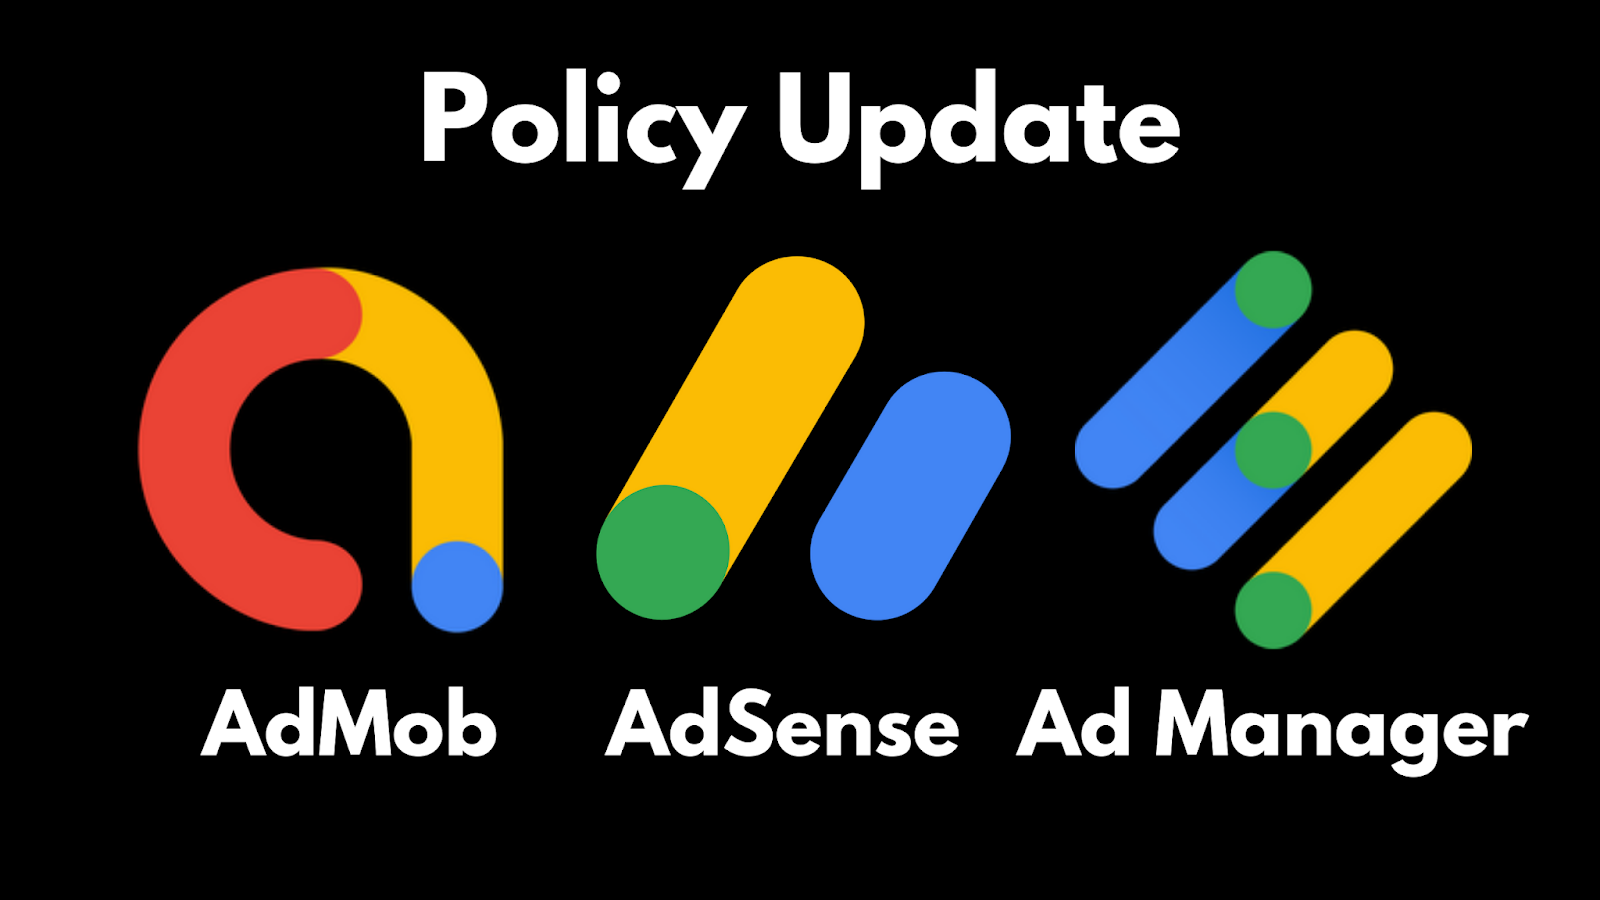 All apps are ready to serve ads, but AdMob still limiting the ads